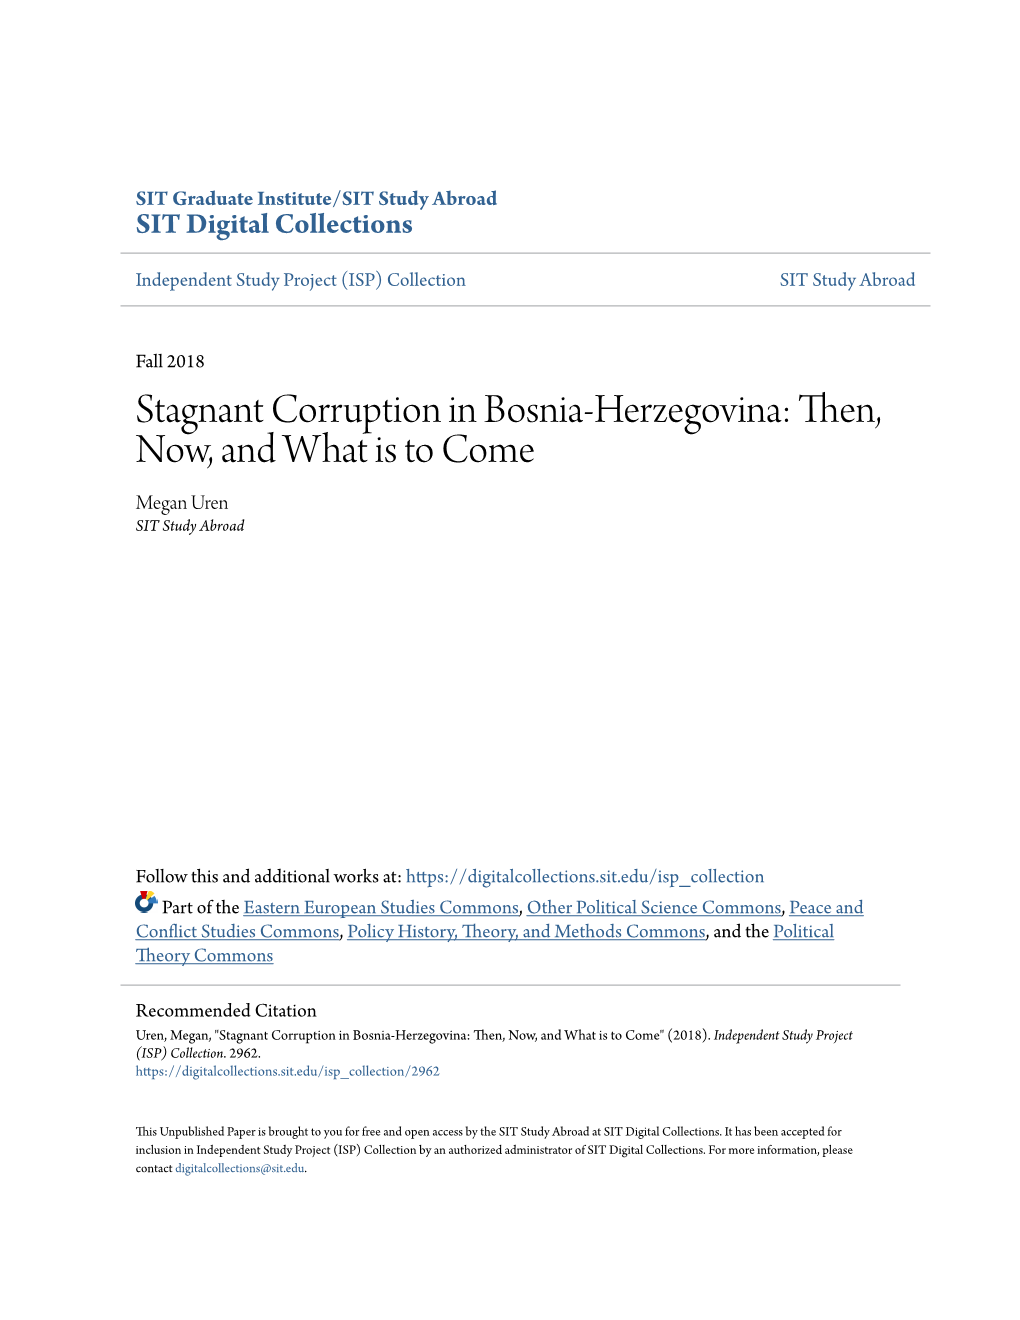 Stagnant Corruption in Bosnia-Herzegovina: Then, Now, and What Is to Come Megan Uren SIT Study Abroad